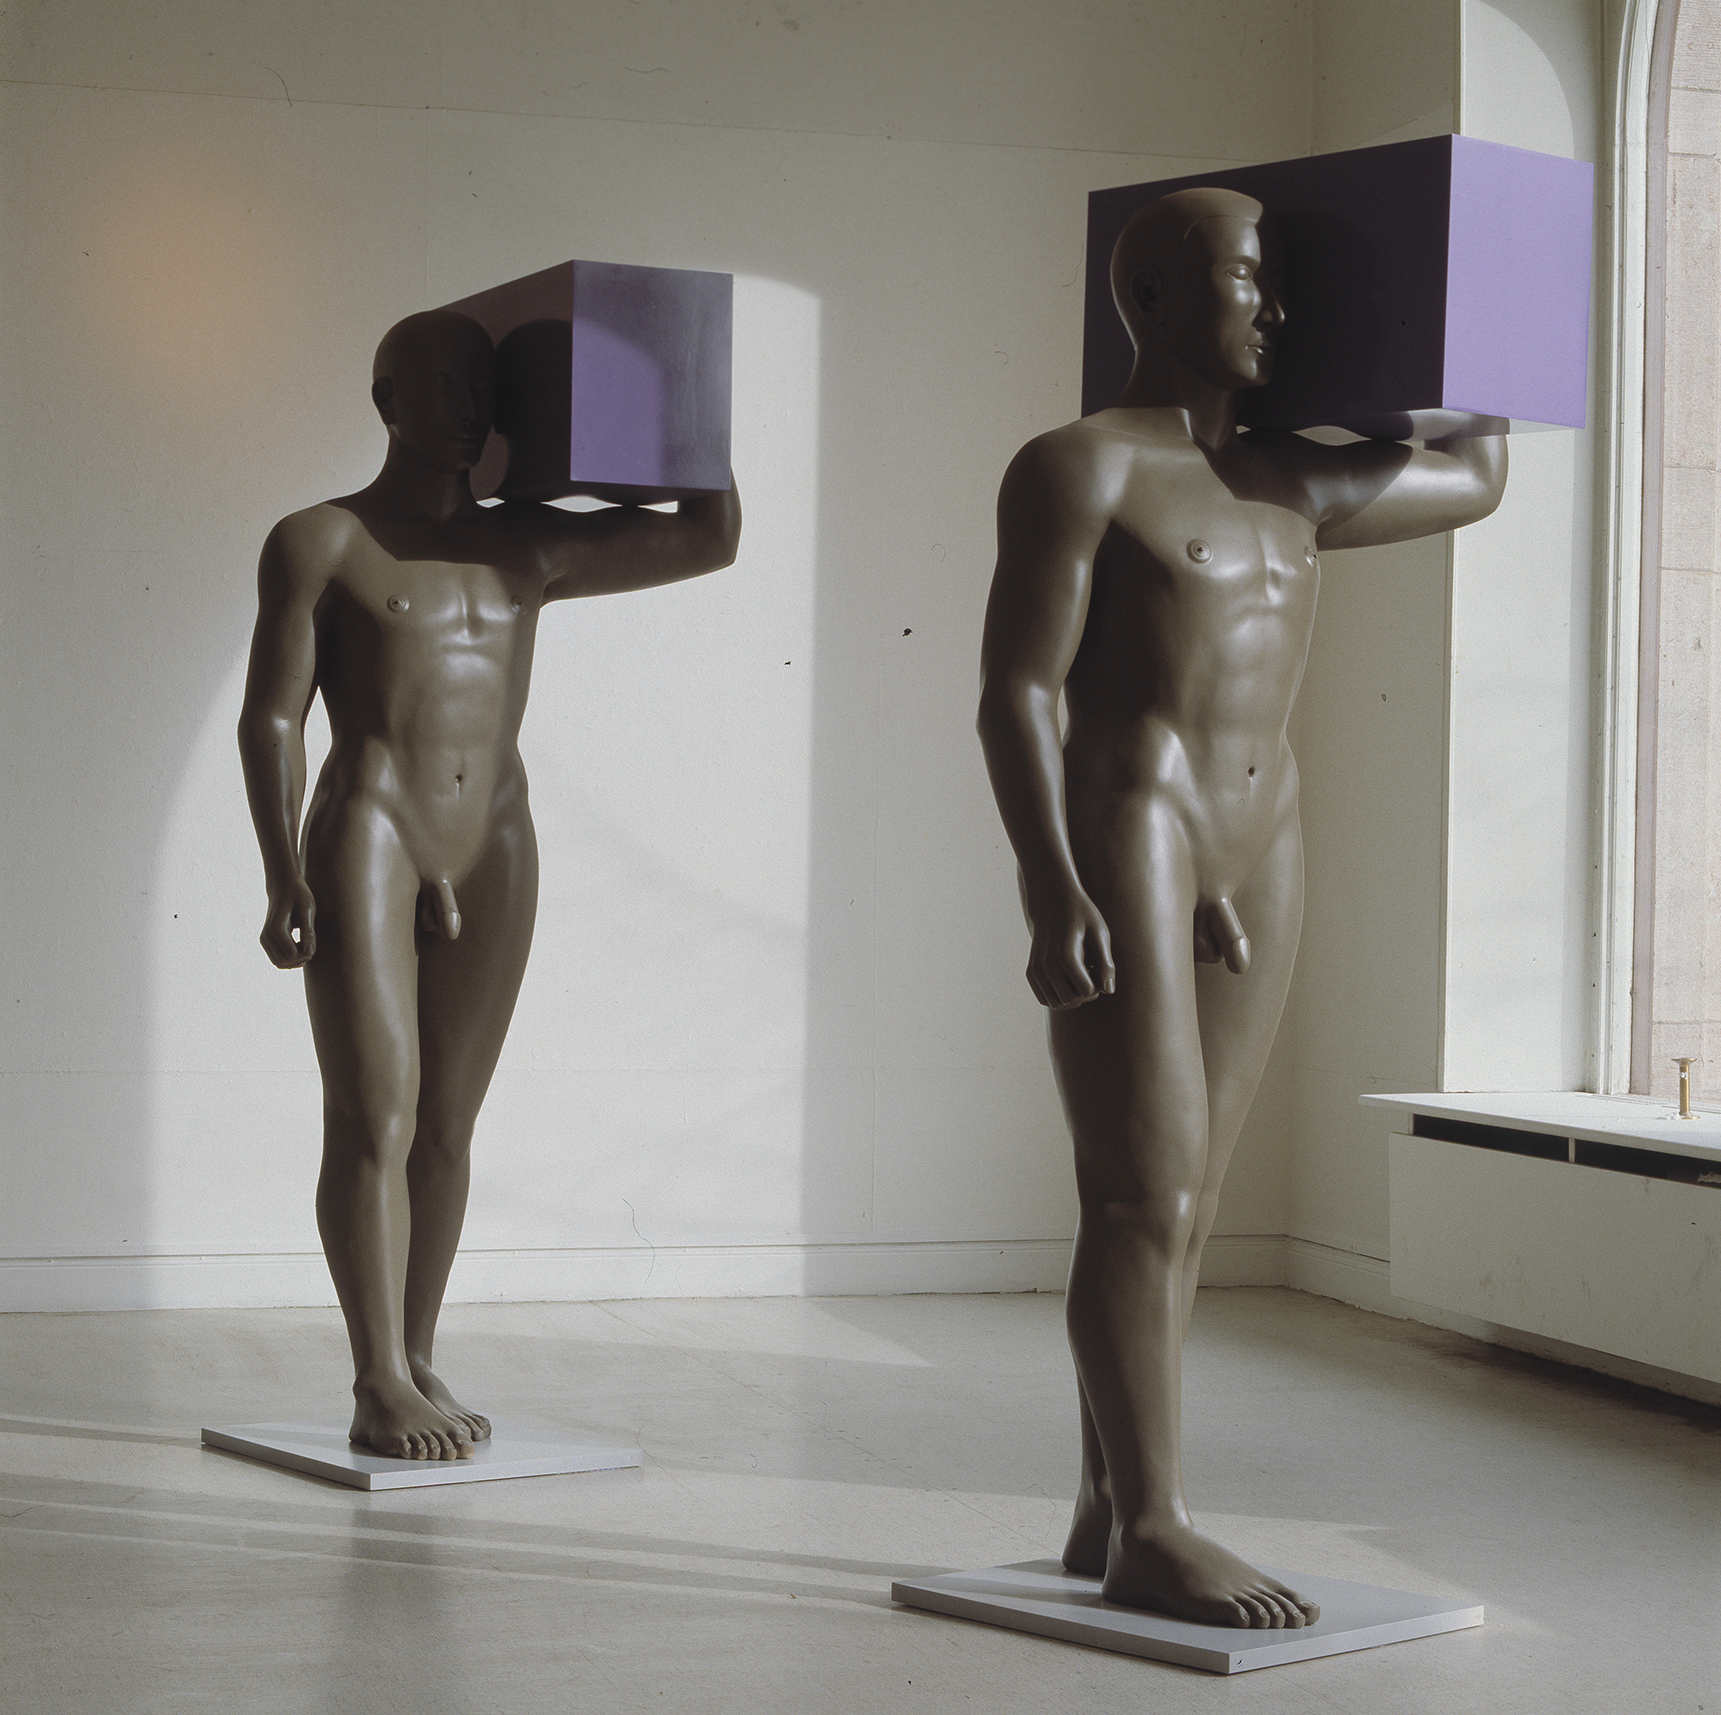 Two sculptures of men holding boxes